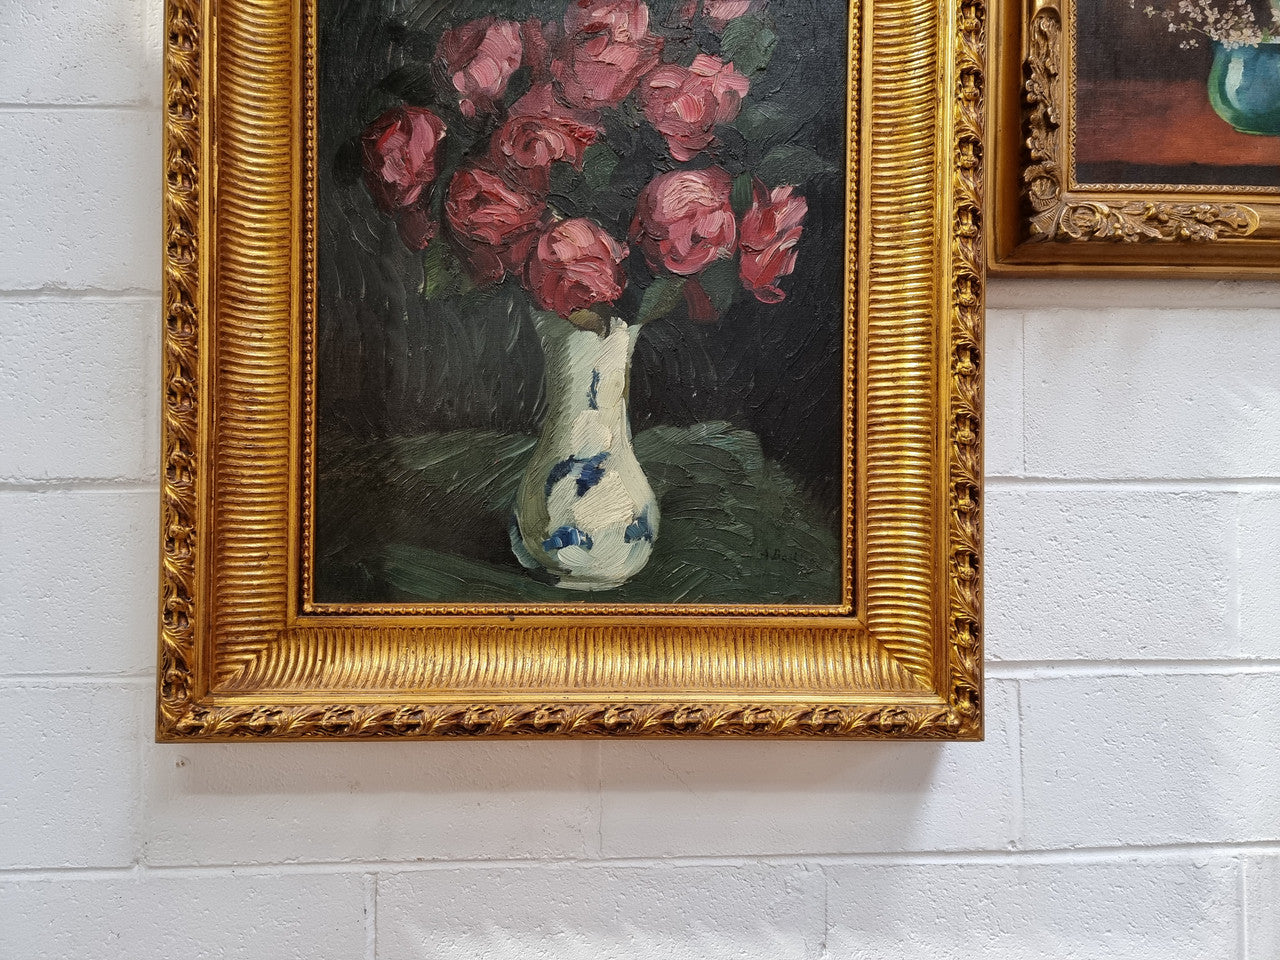 French floral signed oil painting of flowers in a vase in a stunning gilt frame. In good original condition.